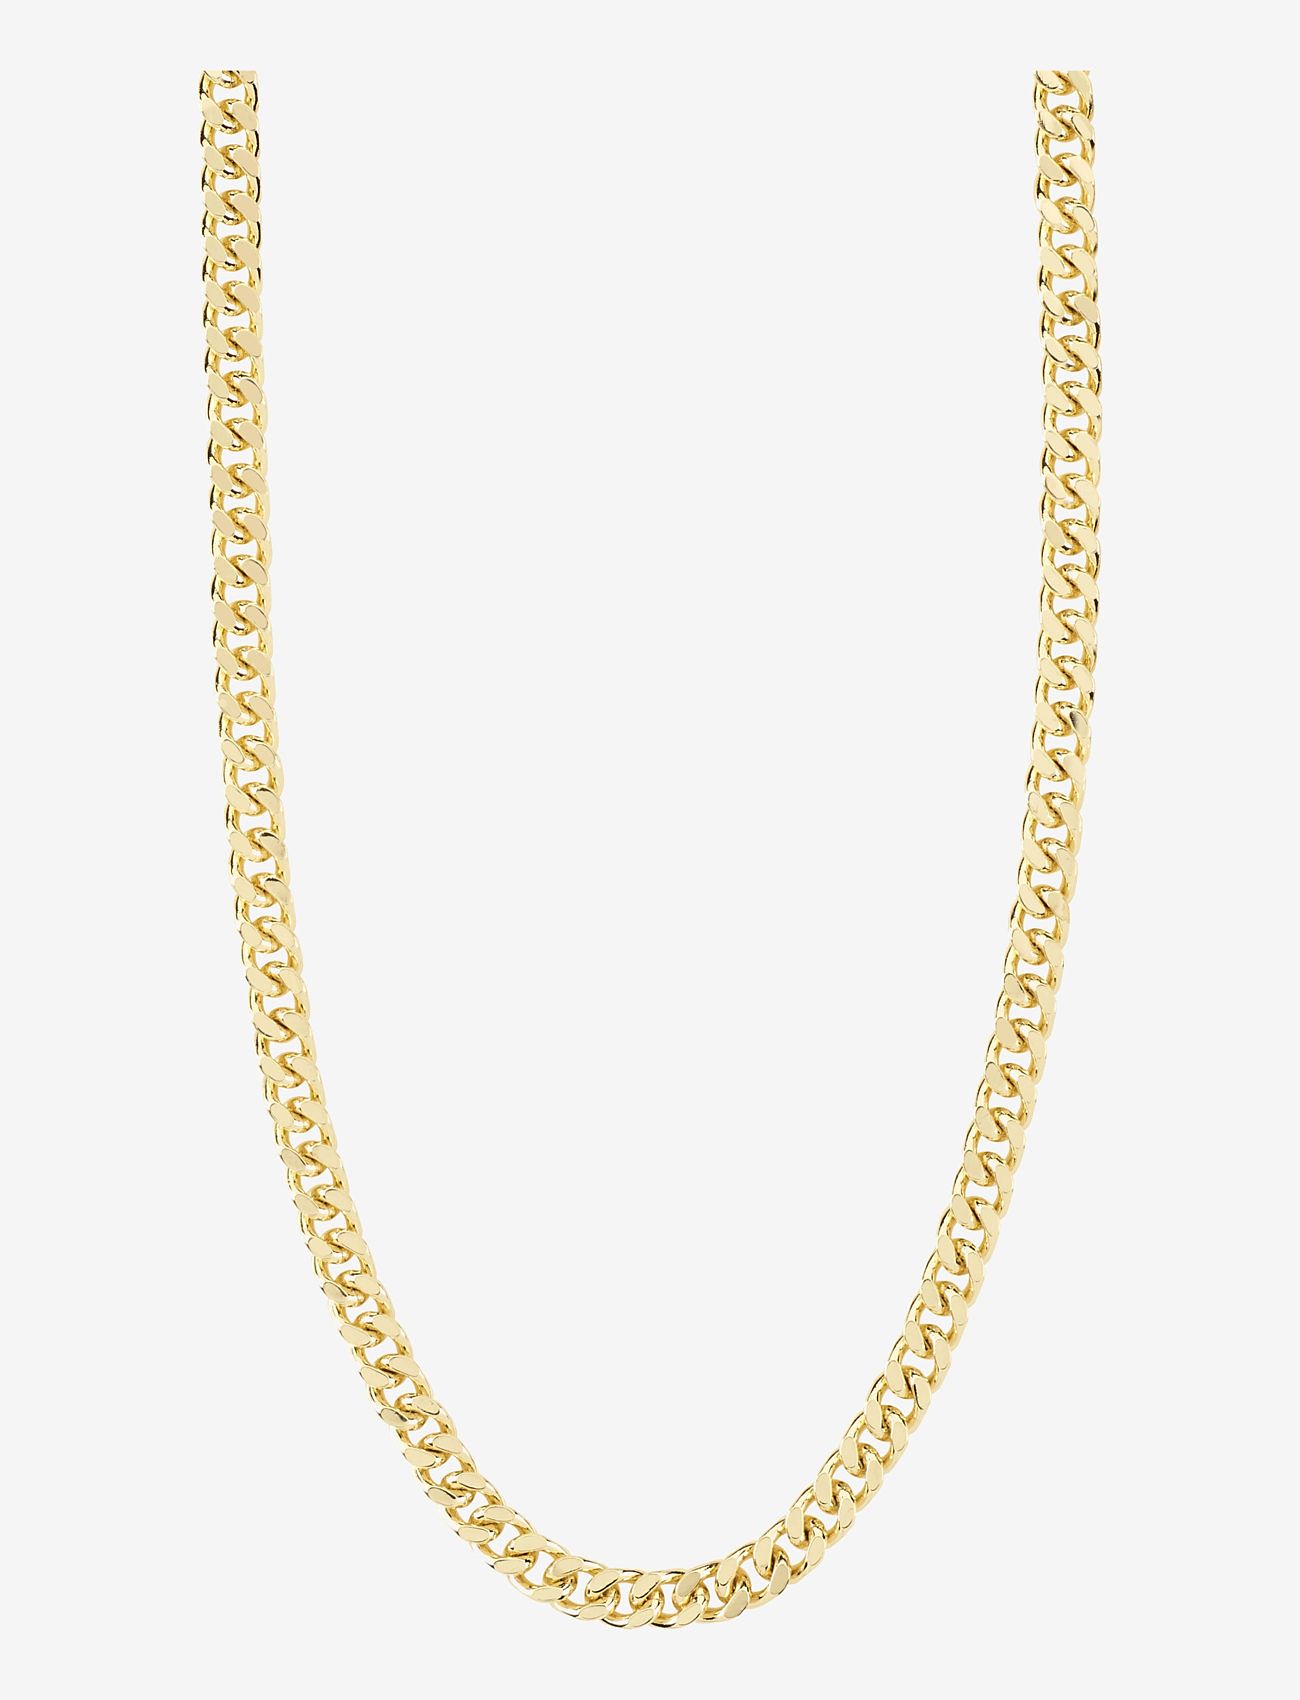 Pilgrim - HEAT recycled chain necklace gold-plated - perlekjeder - gold plated - 0